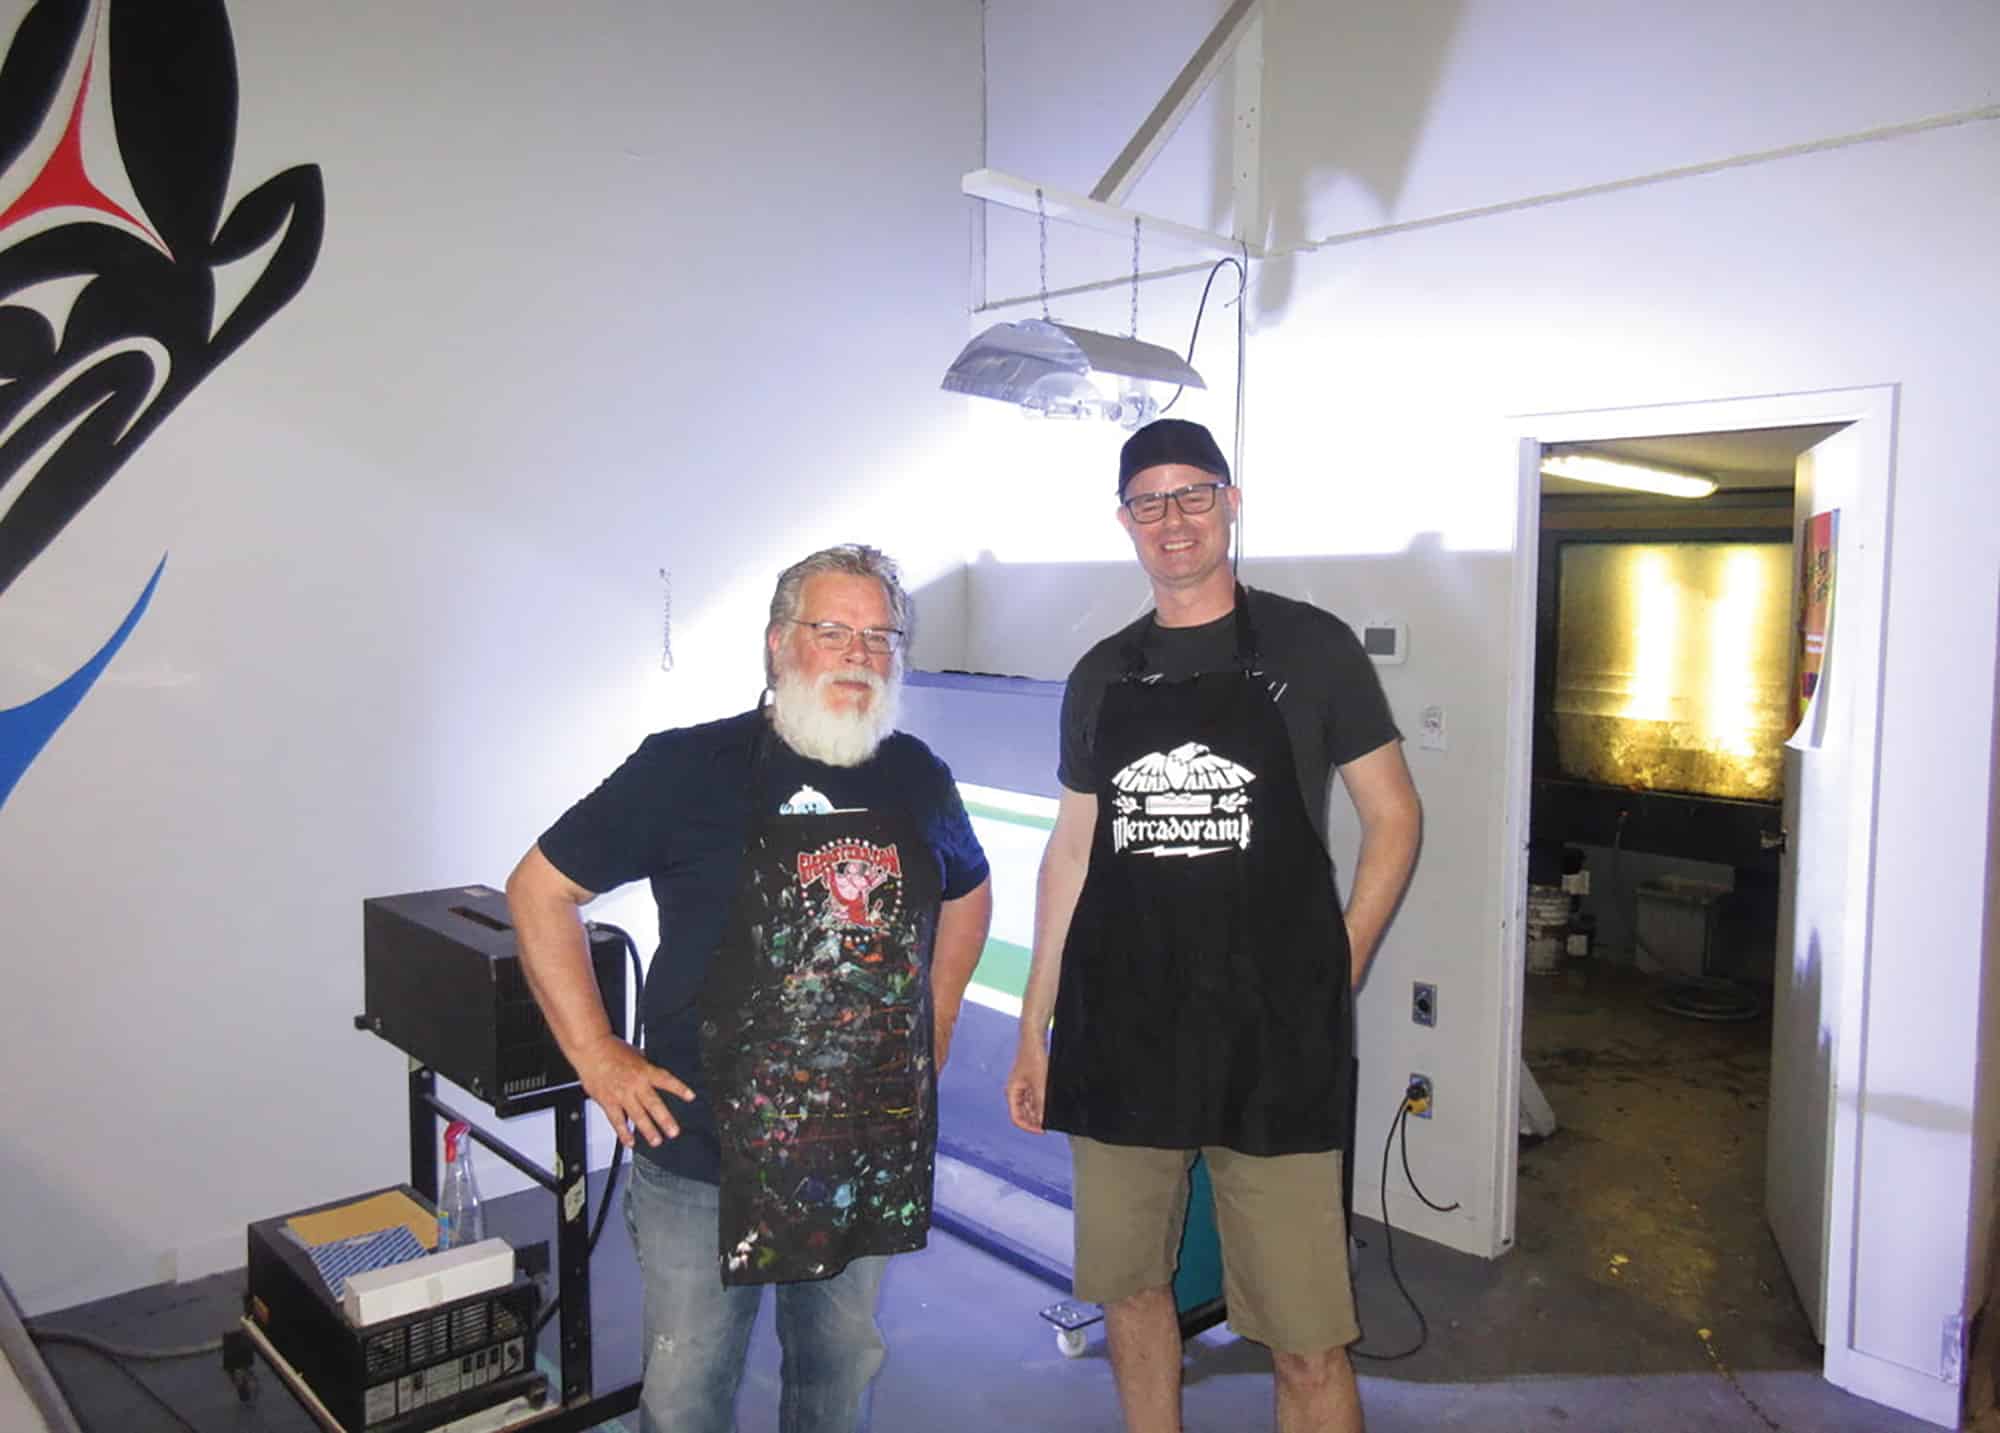 Andymac and Dan Stiles start burning screens as they attempt to bring sound, light, and screen printing together at Squeegeerama 2023, sponsored by Screen Printing magazine, Sefar, RH Solutions, and Creative Materials. Did they succeed? 